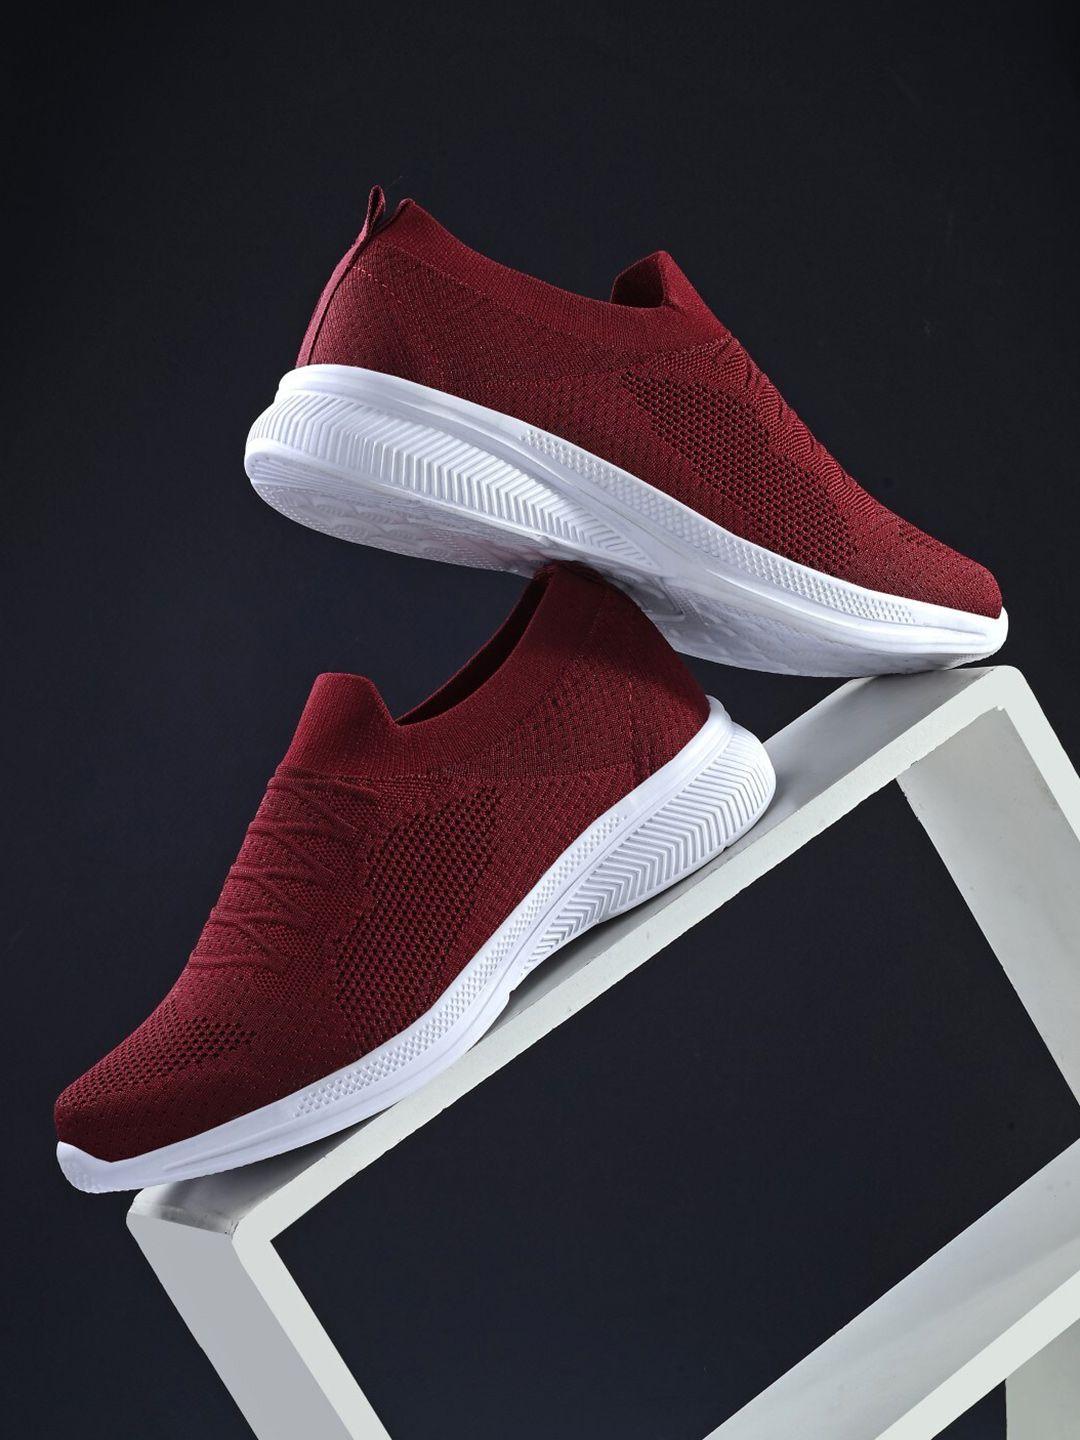 the roadster lifestyle co. men maroon textured slip-on running shoes